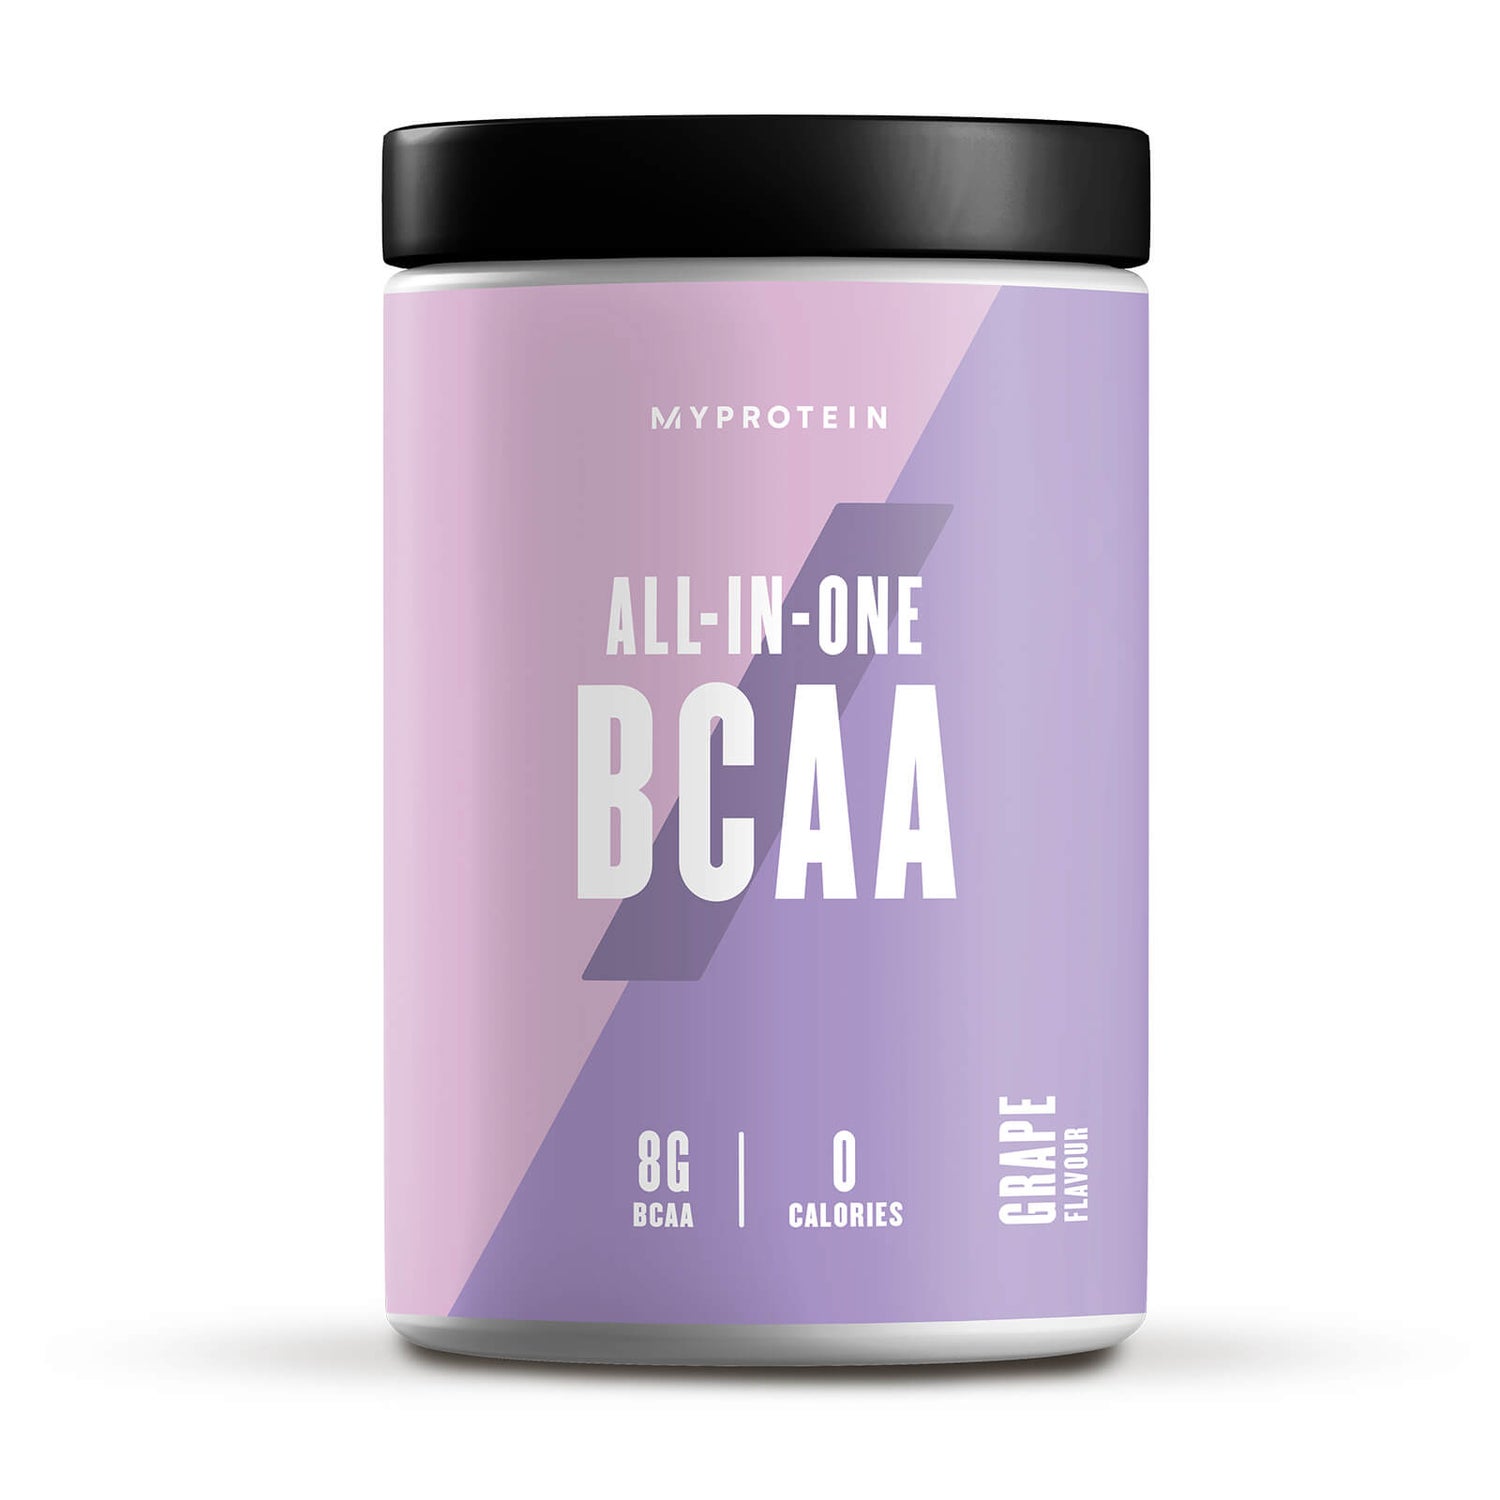 All-In-One BCAA